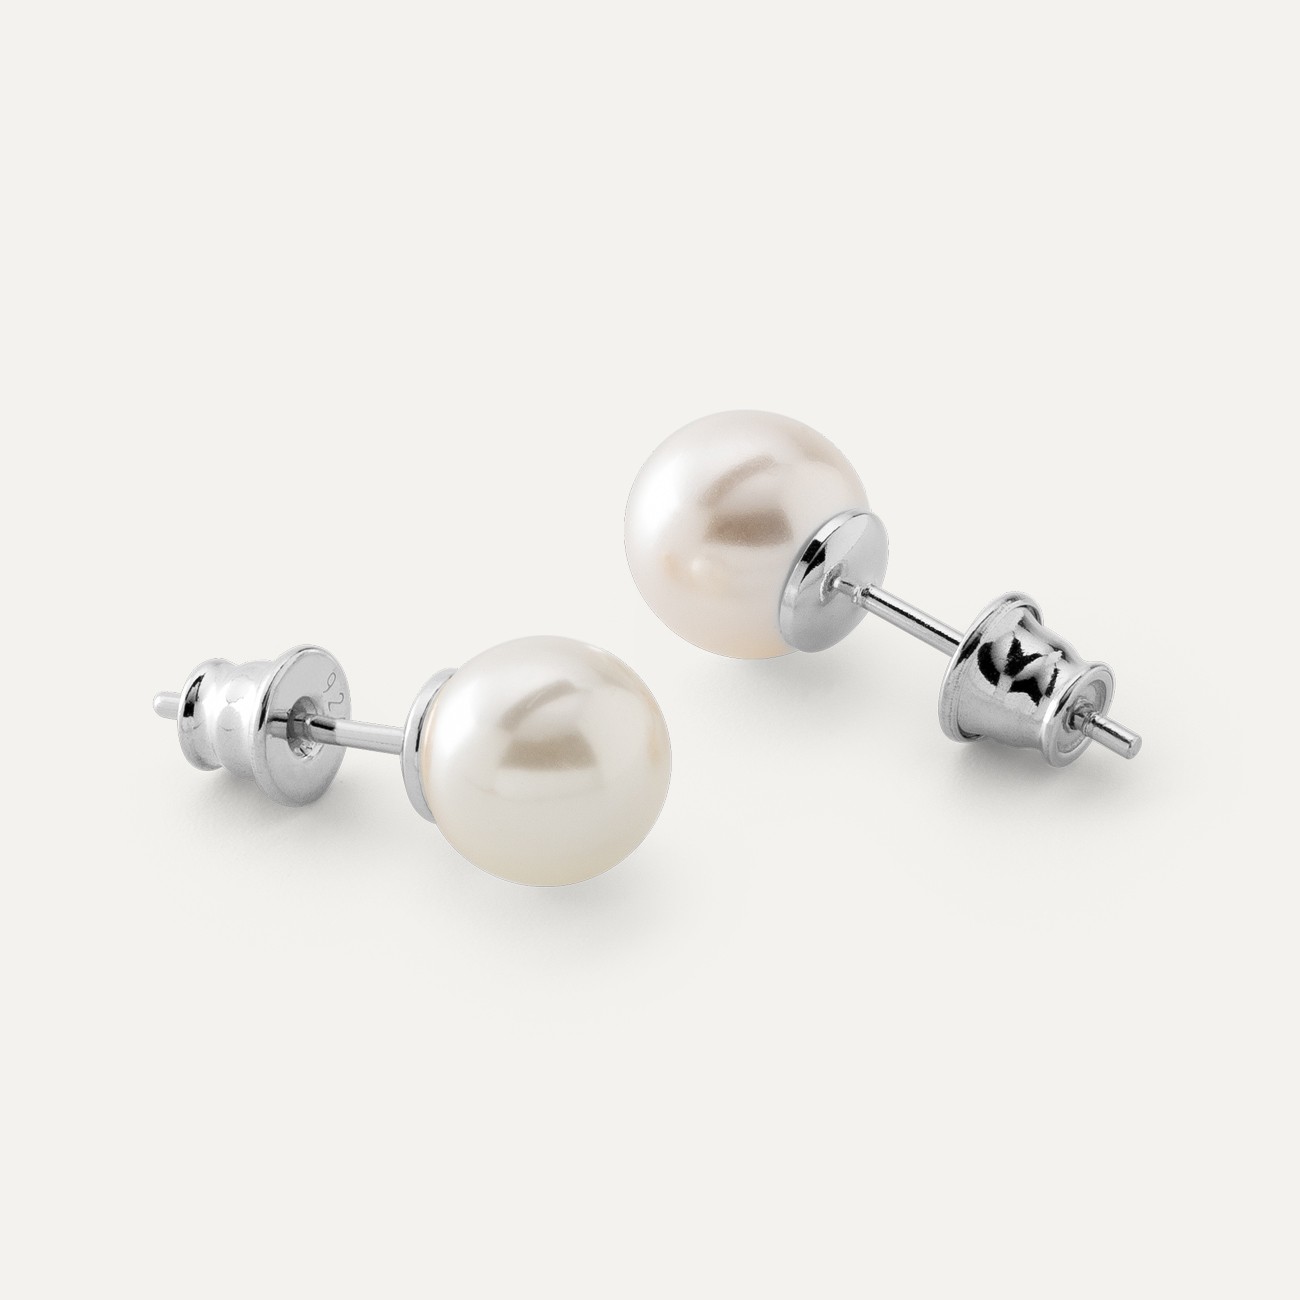 PEARL EARRINGS, SWAROVSKI 5810 MM 8, STERLING SILVER (925) RHODIUM OR GOLD PLATED